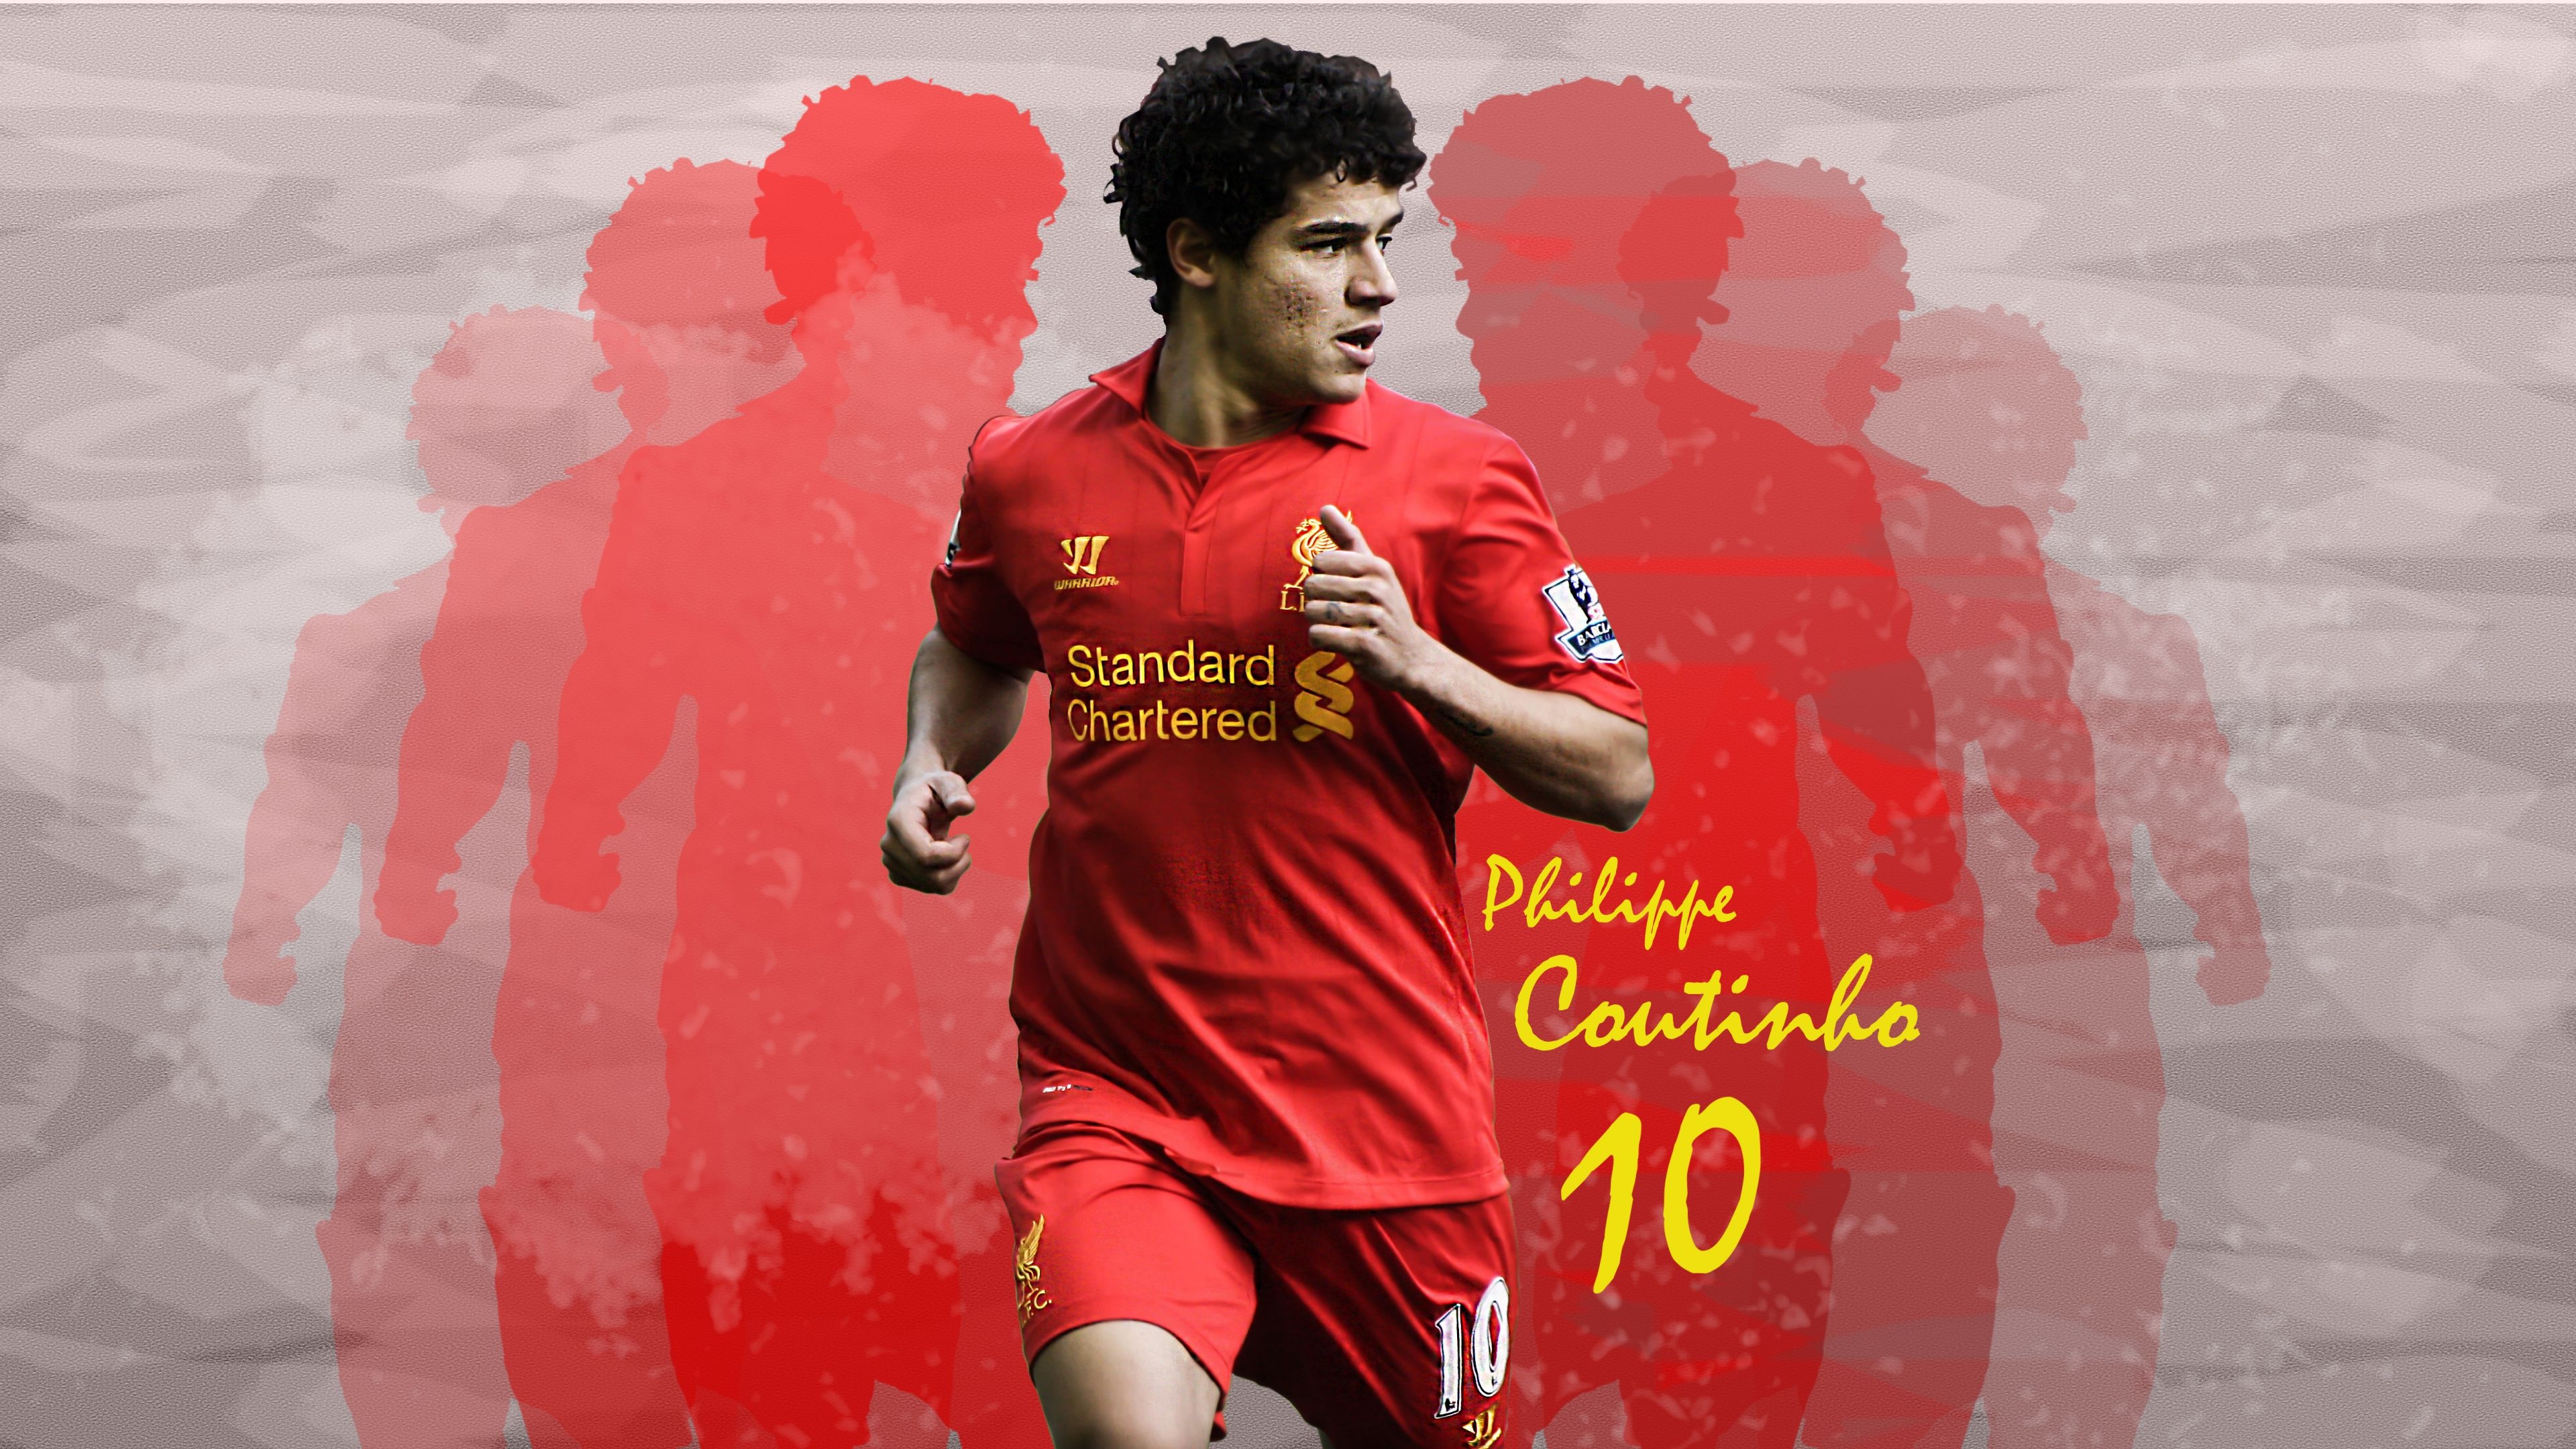 Liverpool Football Club: Philippe Coutinho, Made his debut on 11 February 2013, replacing Stewart Downing. 3840x2160 4K Wallpaper.